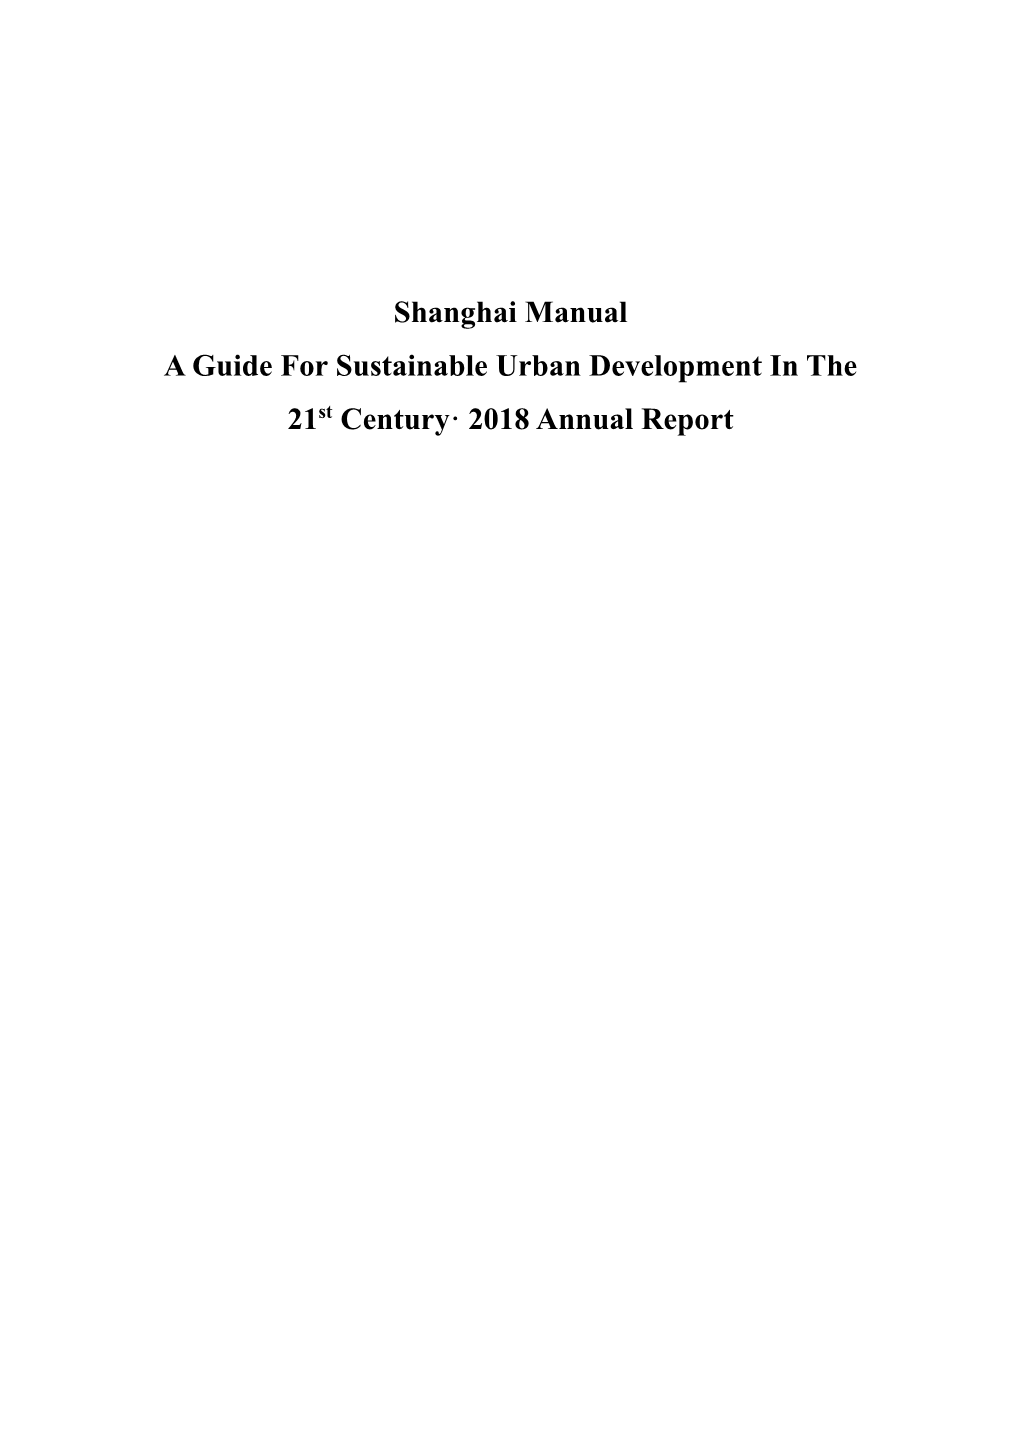 Shanghai Manual a Guide for Sustainable Urban Development in the 21St Century· 2018 Annual Report Preface 1